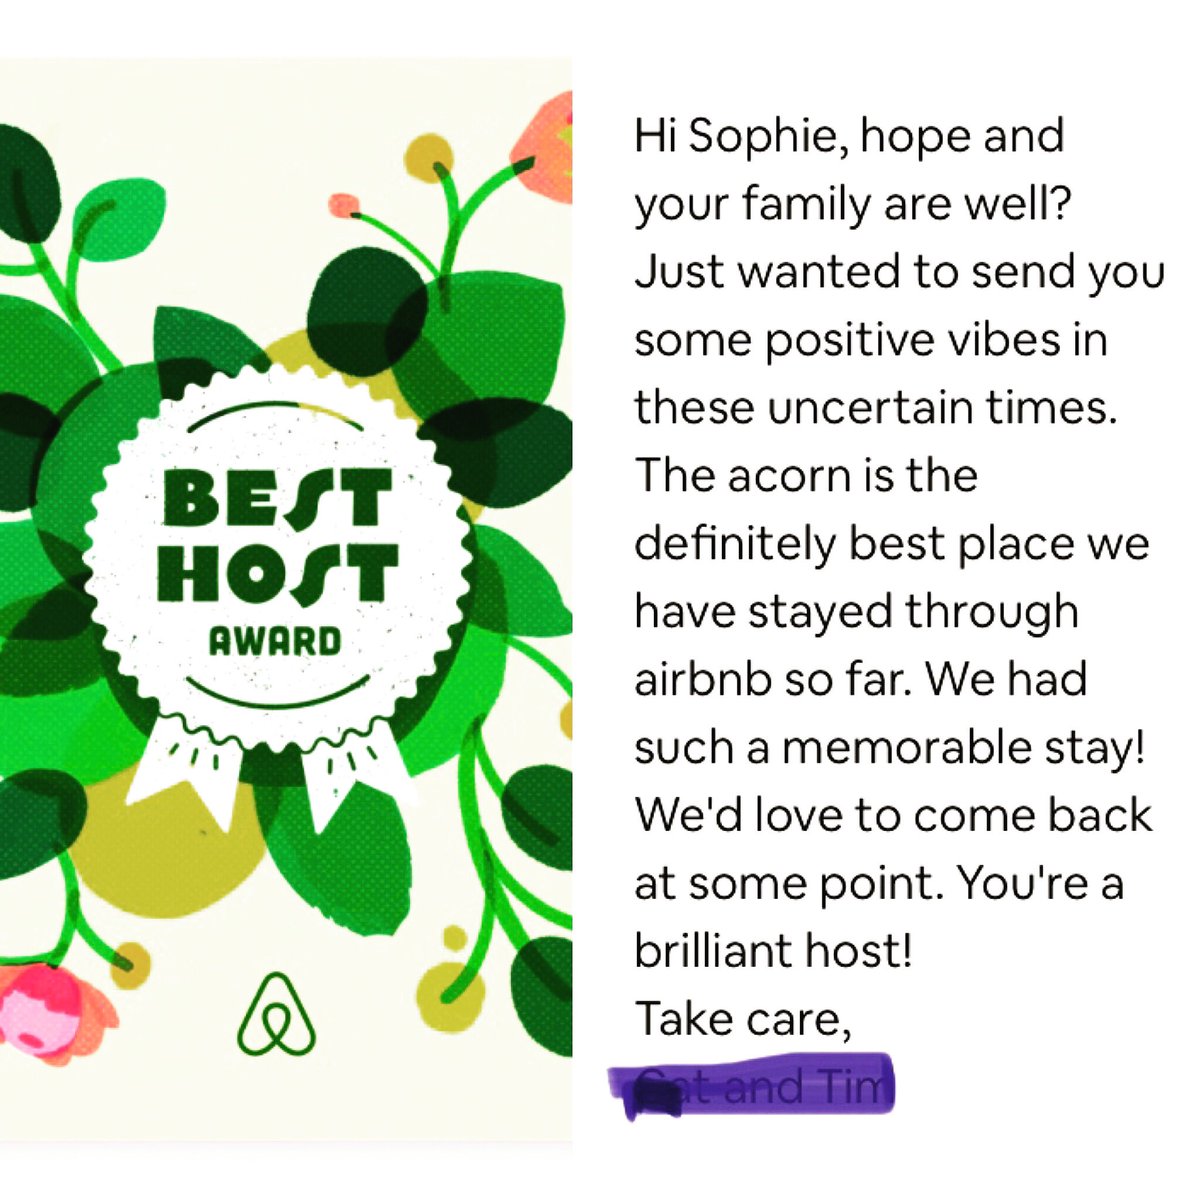 It made my day, receiving this “best host” card from a guest that stayed 2 years ago! #airbnbhost #besthost #airbnblove #sothoughtful #visitus @theacornhut #lovelyguests #mademesmile #hiddengem #staycation #wales #staysomewheredifferent